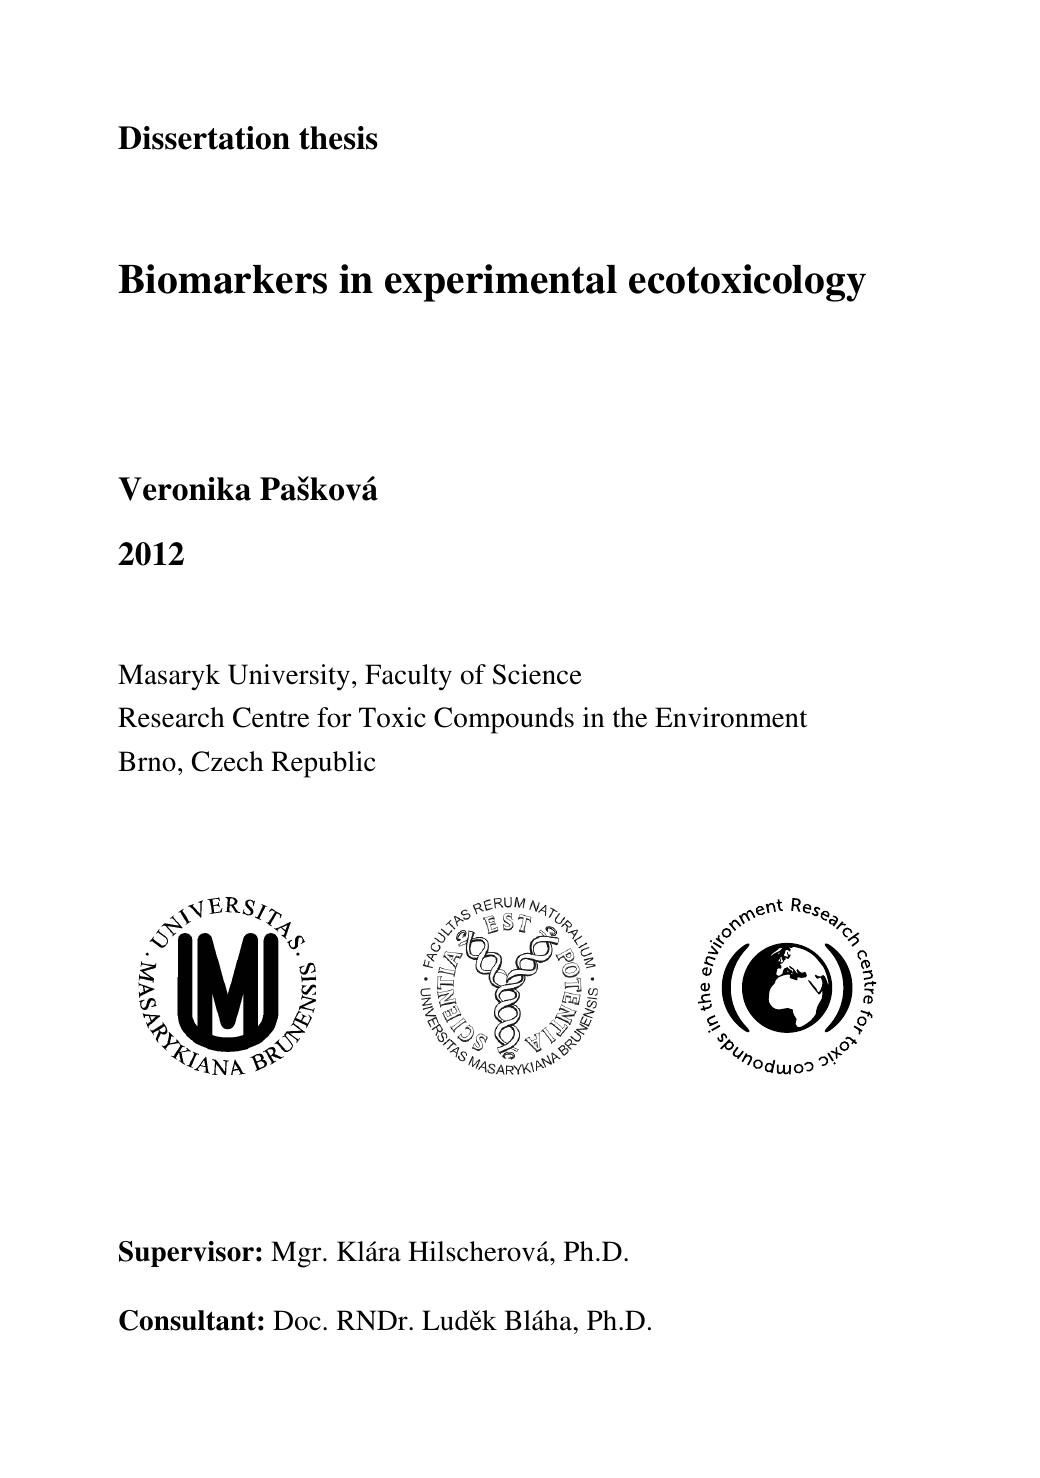 Biomarkers in experimental ecotoxicology